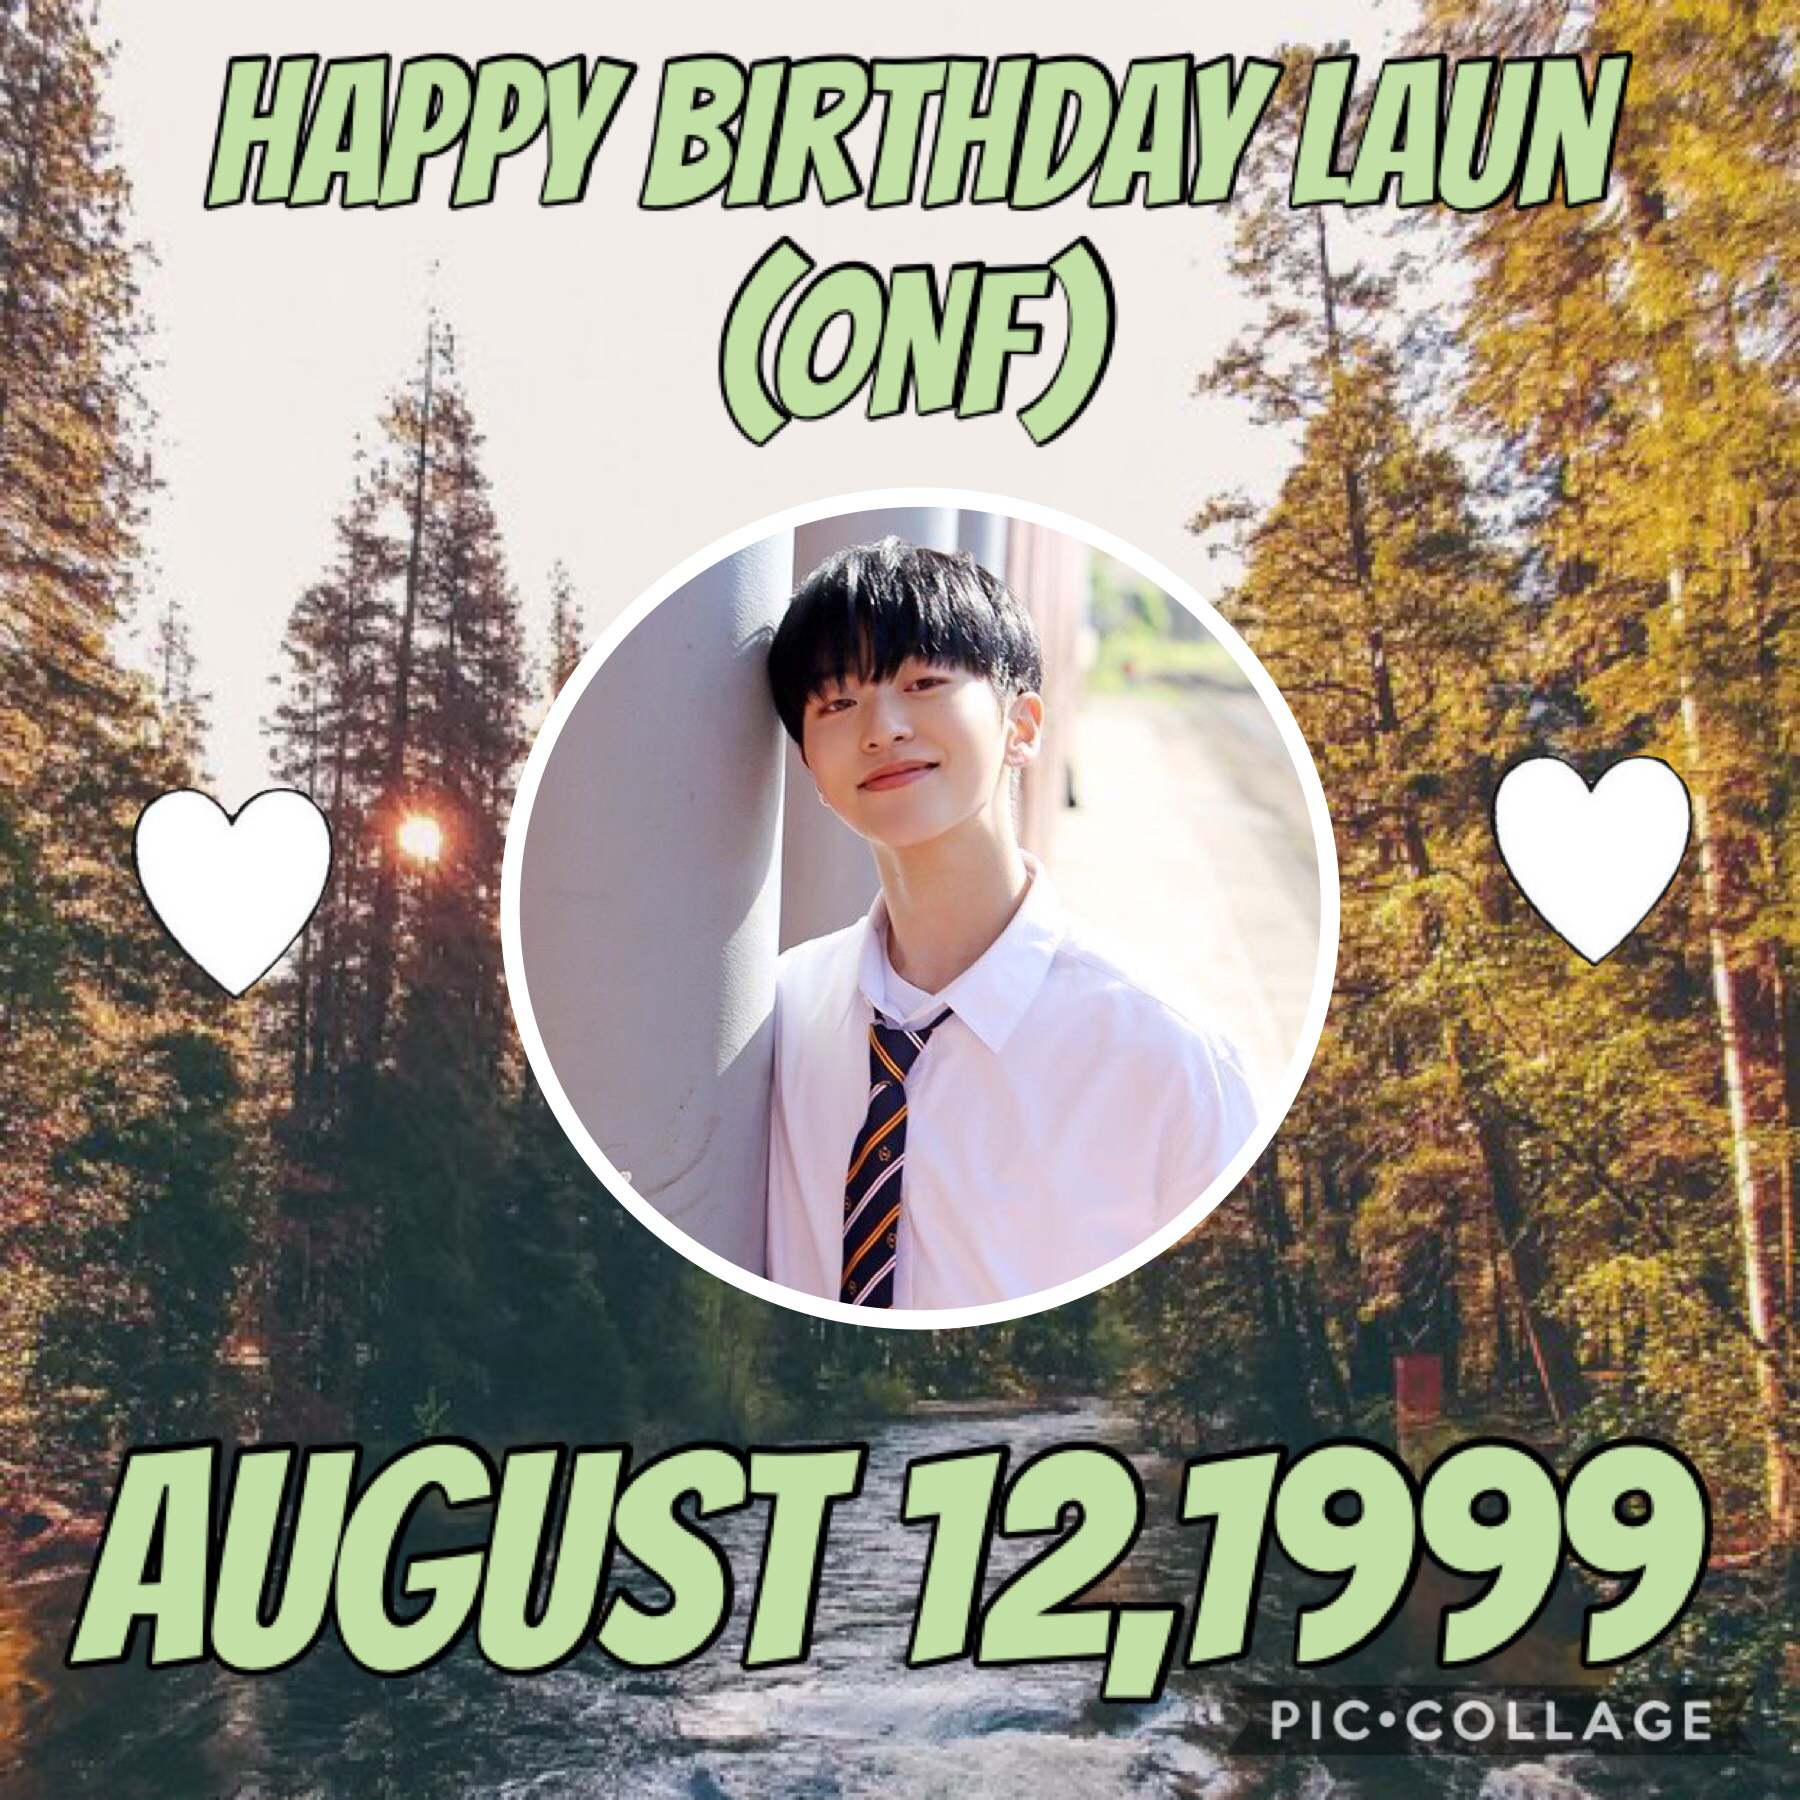 •Kim Minseok•
Happy birthday!!!! Omgggg I had a huge phase where I would fangirl so much over Laun haha. If any of you remember that than wow you’ve been with me for a long time:)
Other birthdays today:
•FX’s Luna
•CLC’s YuJin
🍃🌴🍃🌴Whoop🌴🍃🌴🍃